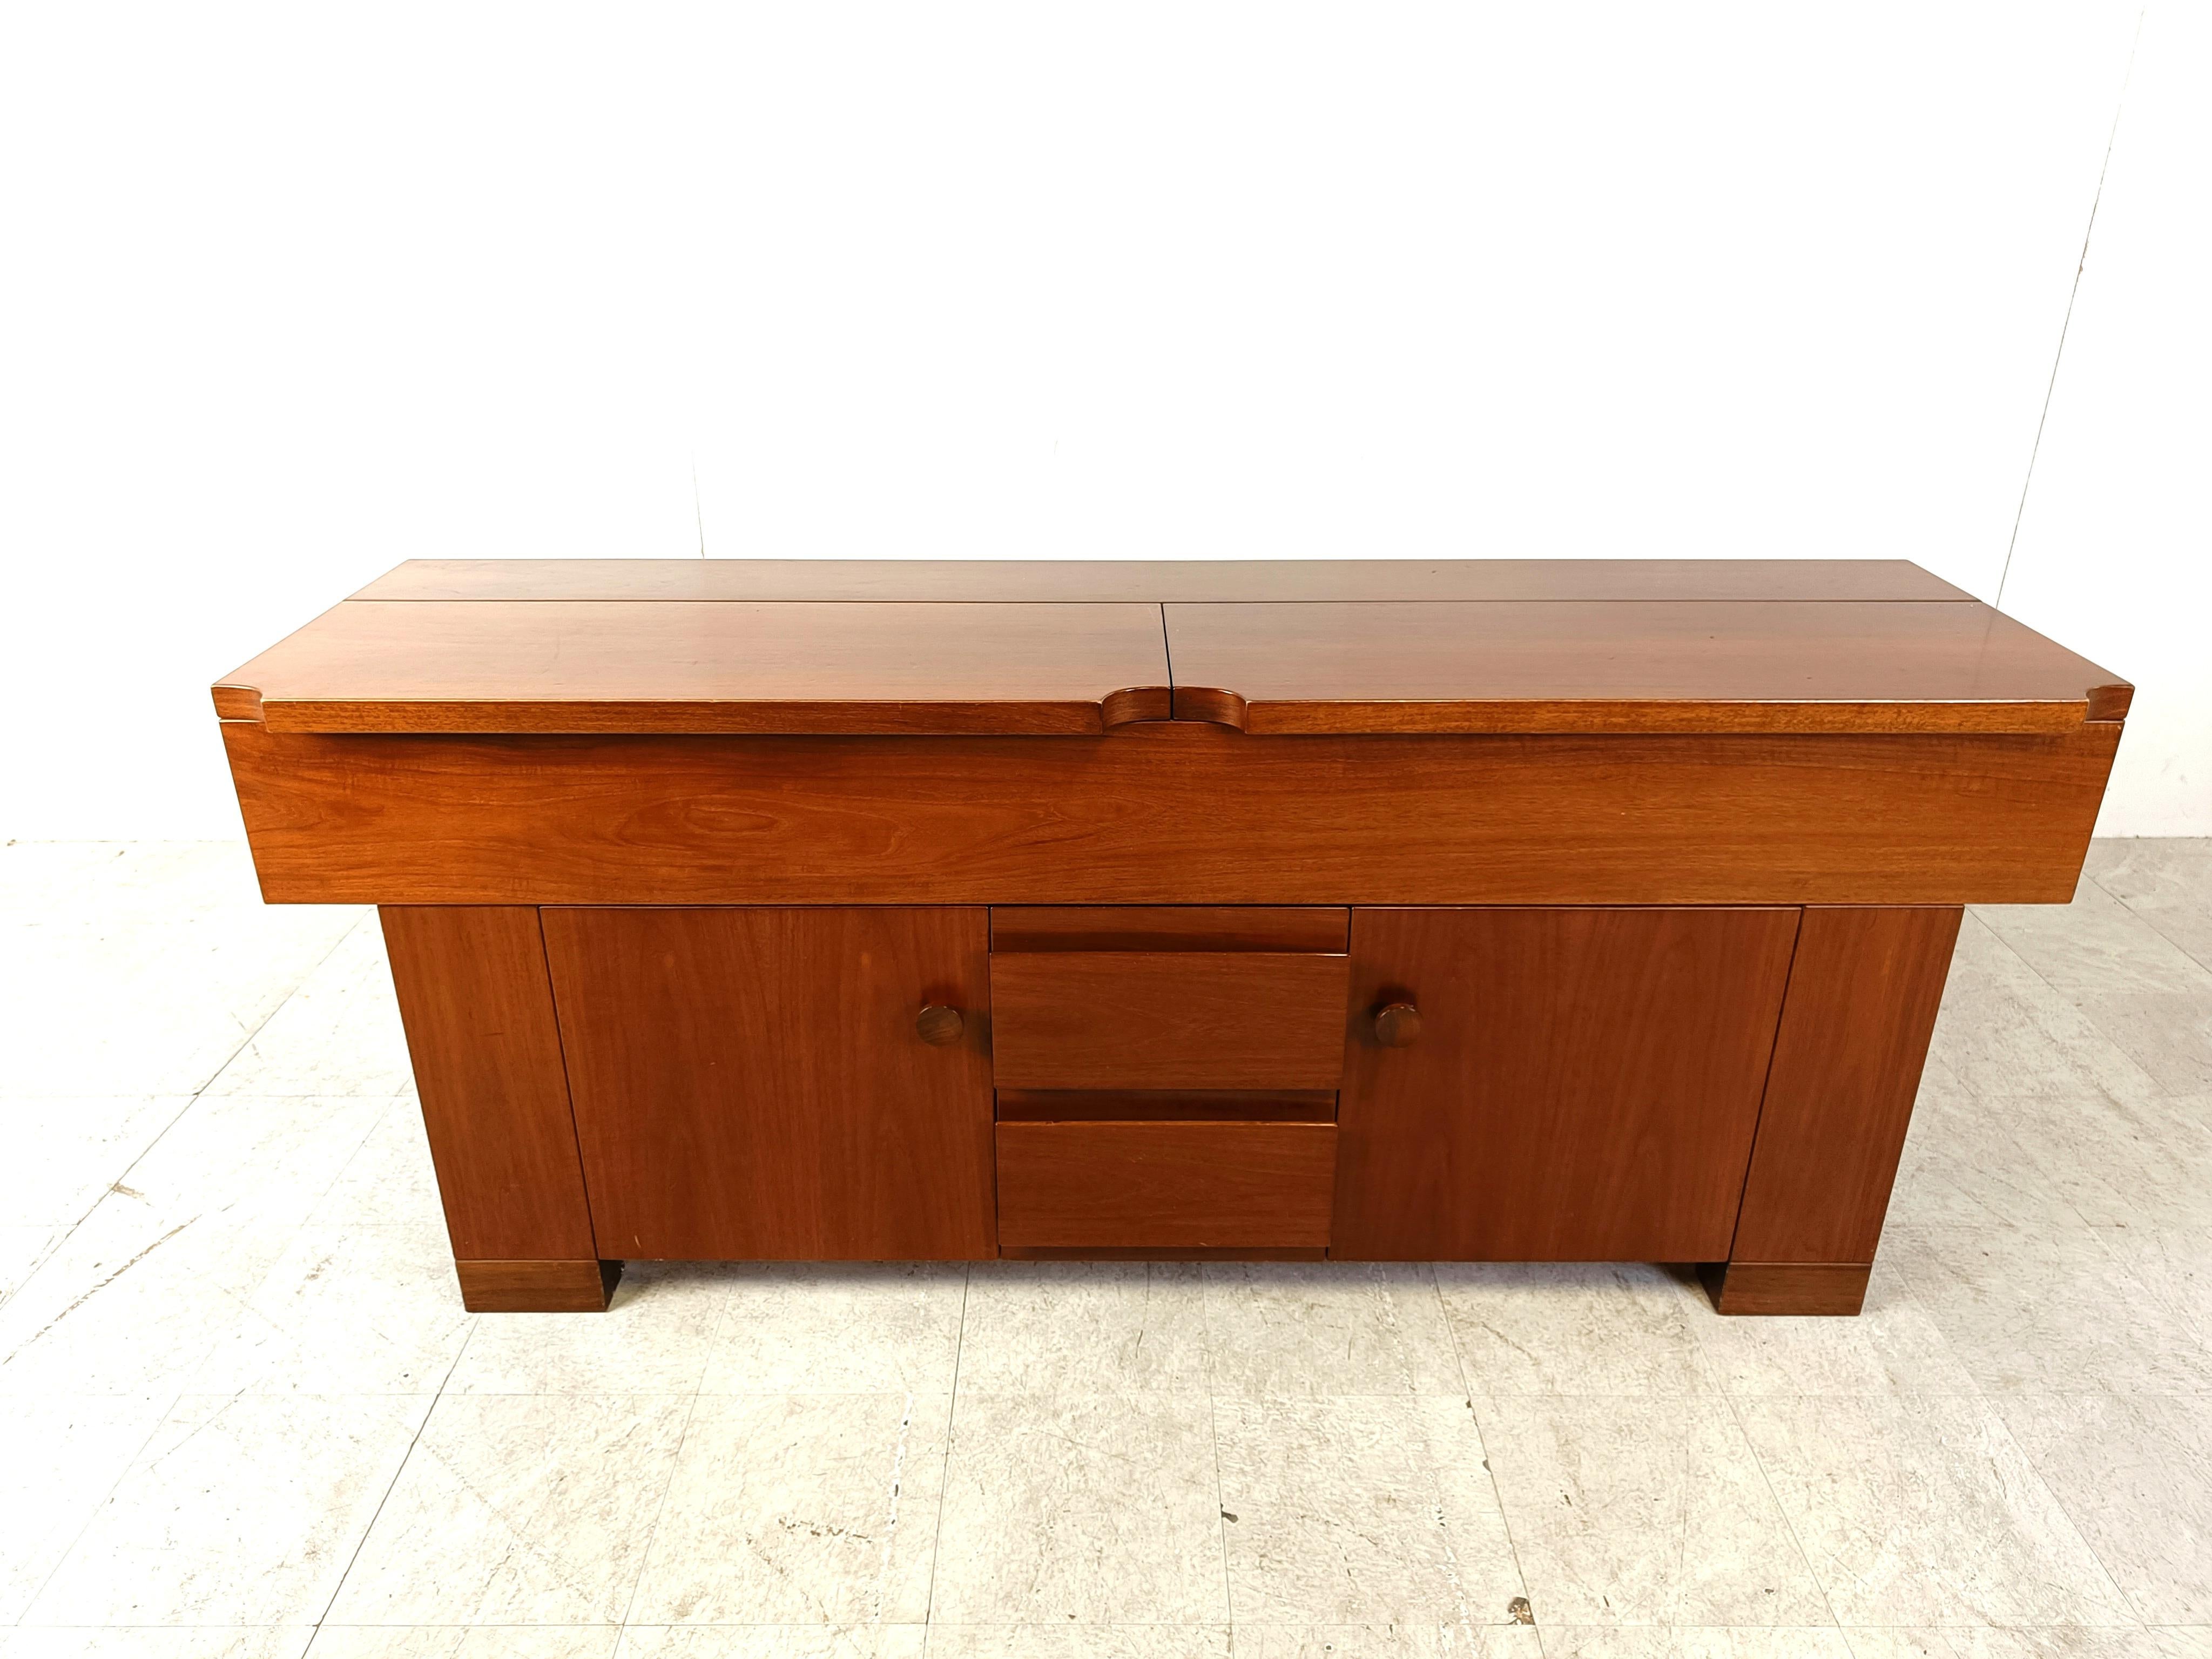 Rare mid century sideboard designed by Giovanni Michelucci  for Poltronova model 'torbecchia'.

this walnut sideboard has two unique folding tops, 2 regular doors and 2 central drawers

The signature of Giovanni Michelucci is visible on a sideboard